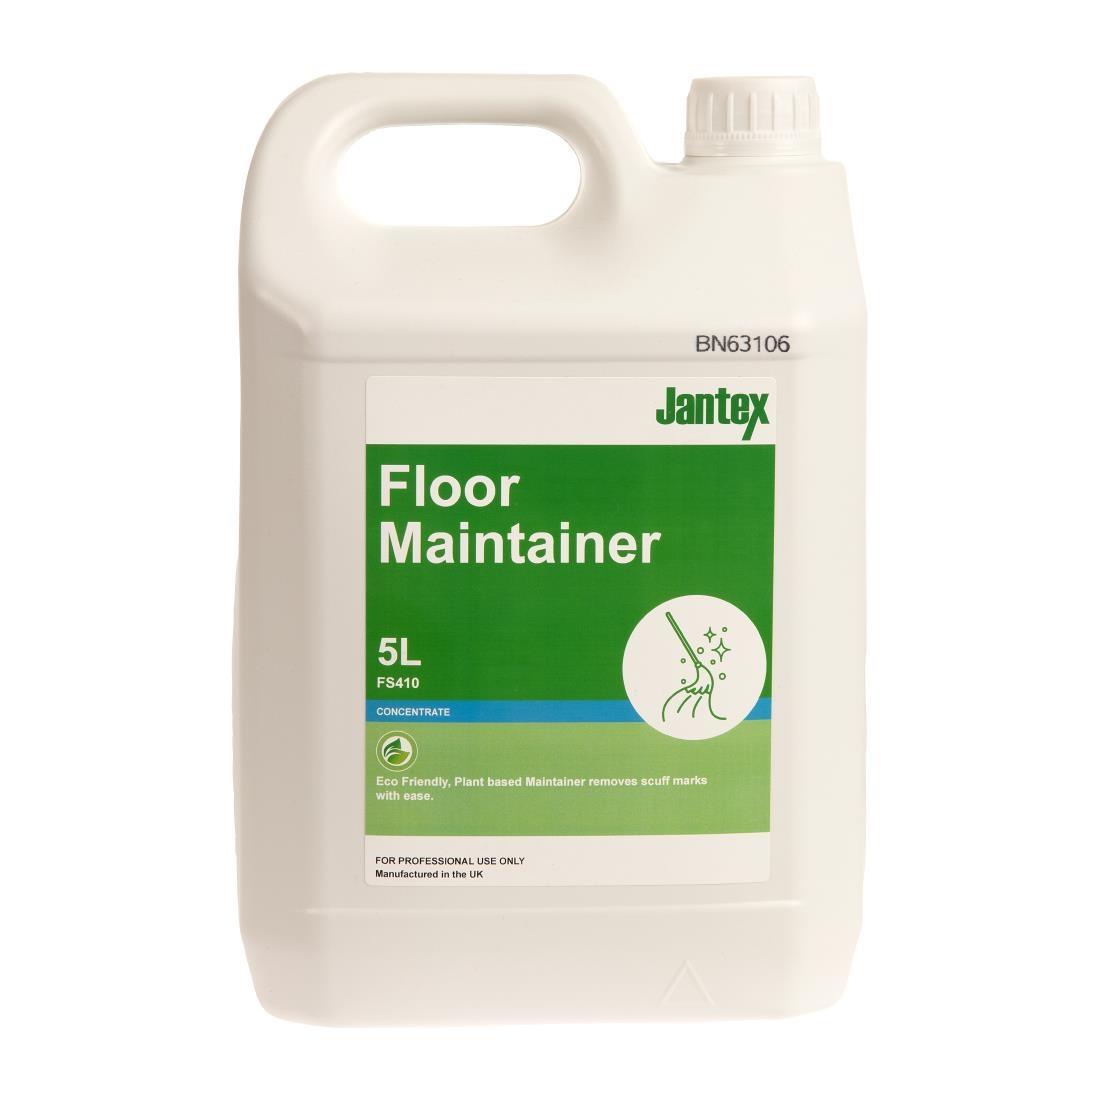 Jantex Green Floor Maintainer Concentrate 5Ltr - FS410  - 1